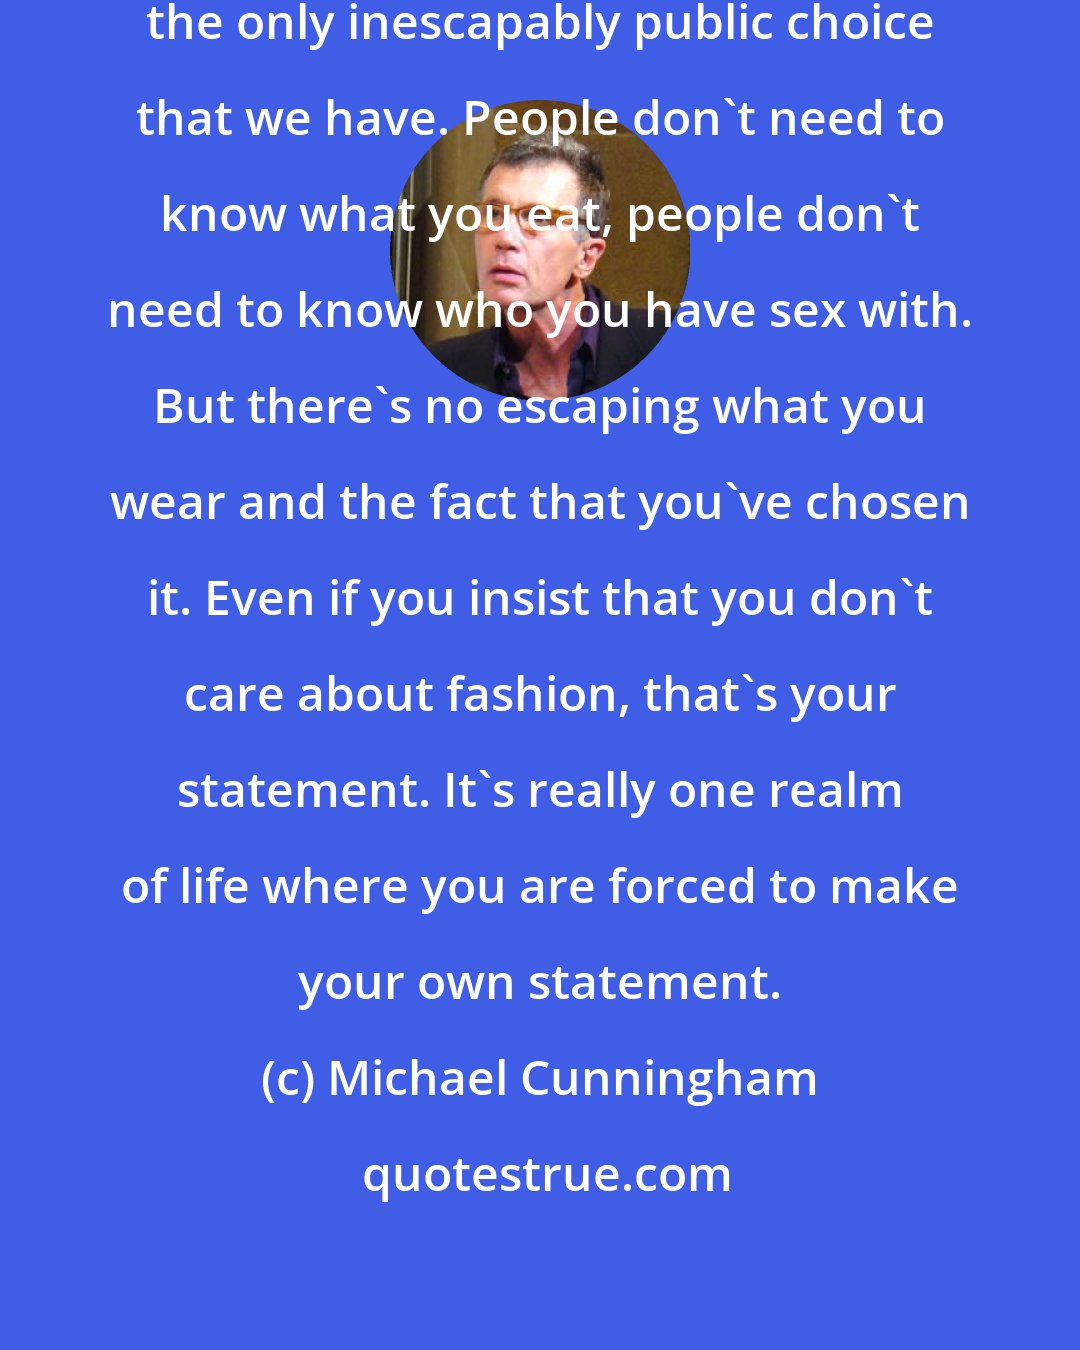 Michael Cunningham: How we dress is, as far as I can tell, the only inescapably public choice that we have. People don't need to know what you eat, people don't need to know who you have sex with. But there's no escaping what you wear and the fact that you've chosen it. Even if you insist that you don't care about fashion, that's your statement. It's really one realm of life where you are forced to make your own statement.